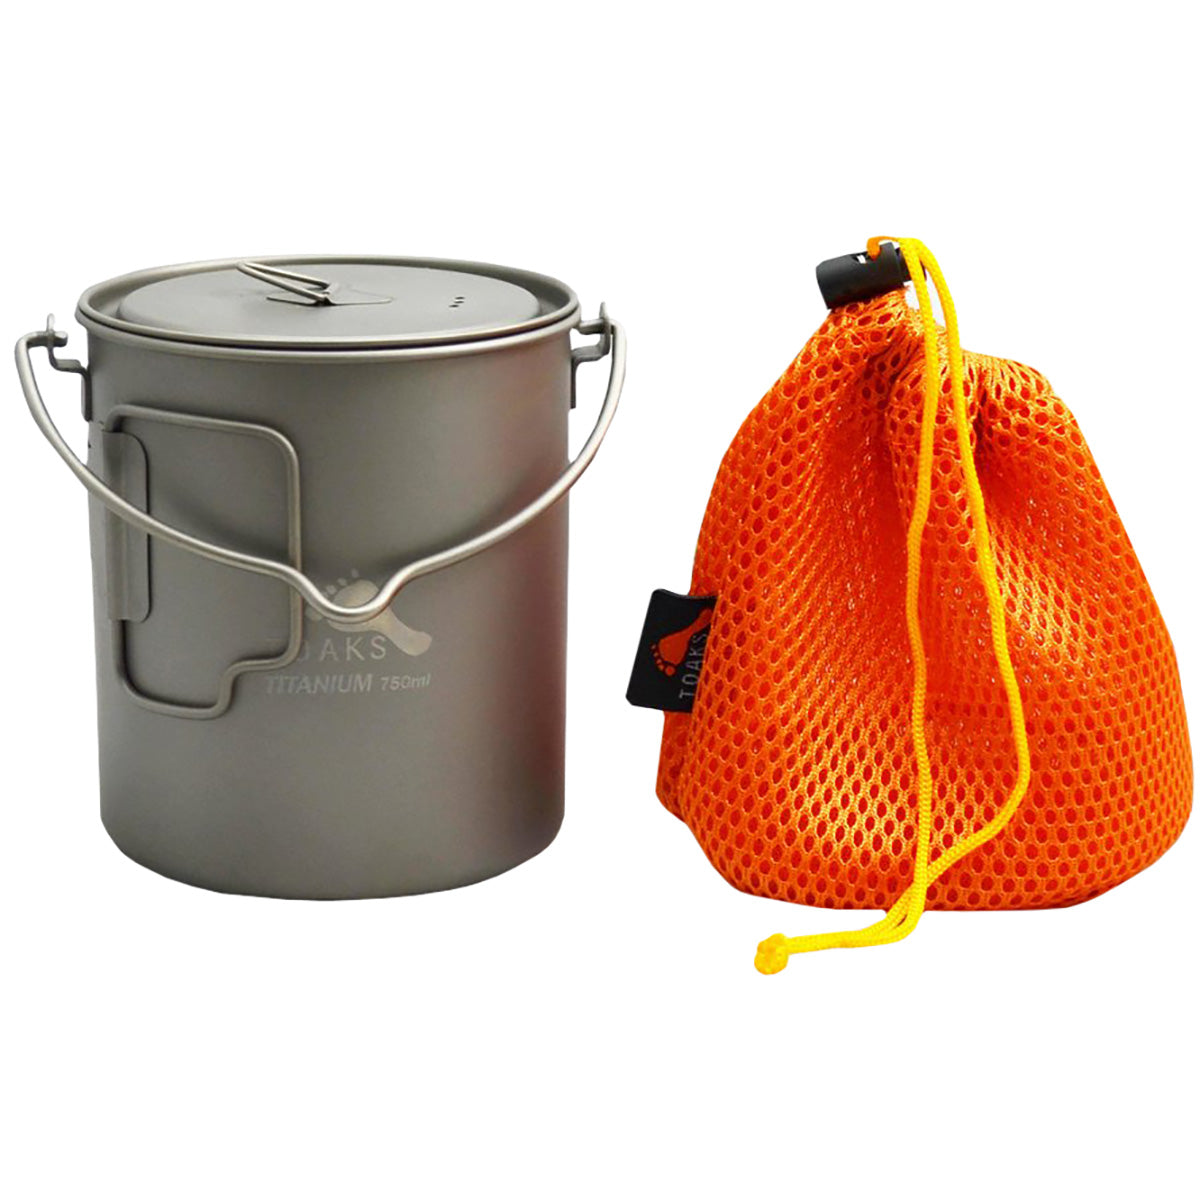 TOAKS 750ml Ultralight Titanium Camping Cook Pot with Bail Handle and Lid TOAKS